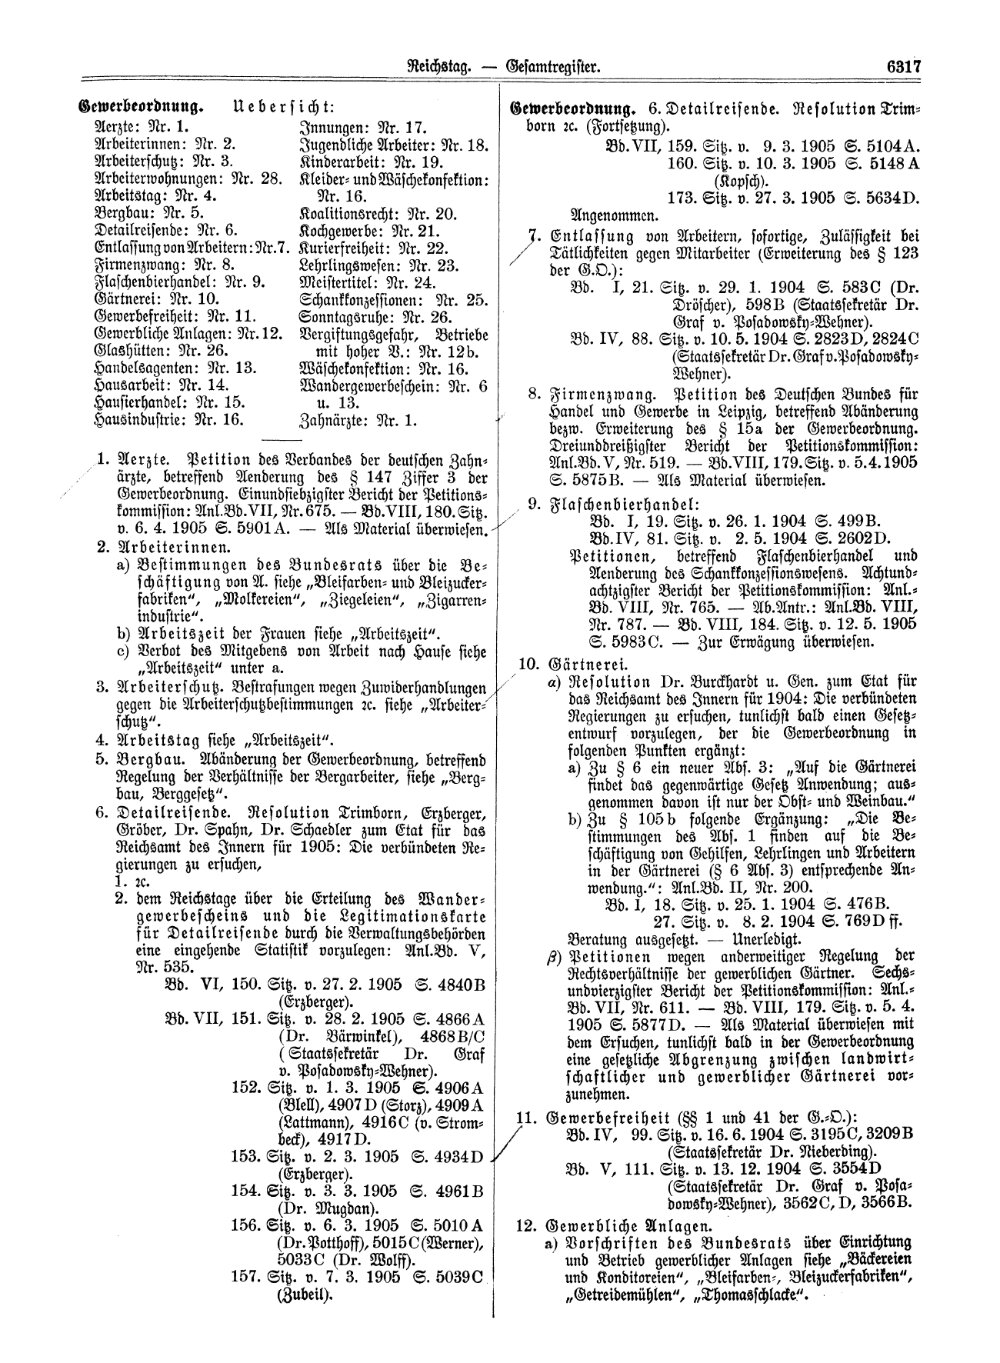 Scan of page 6317